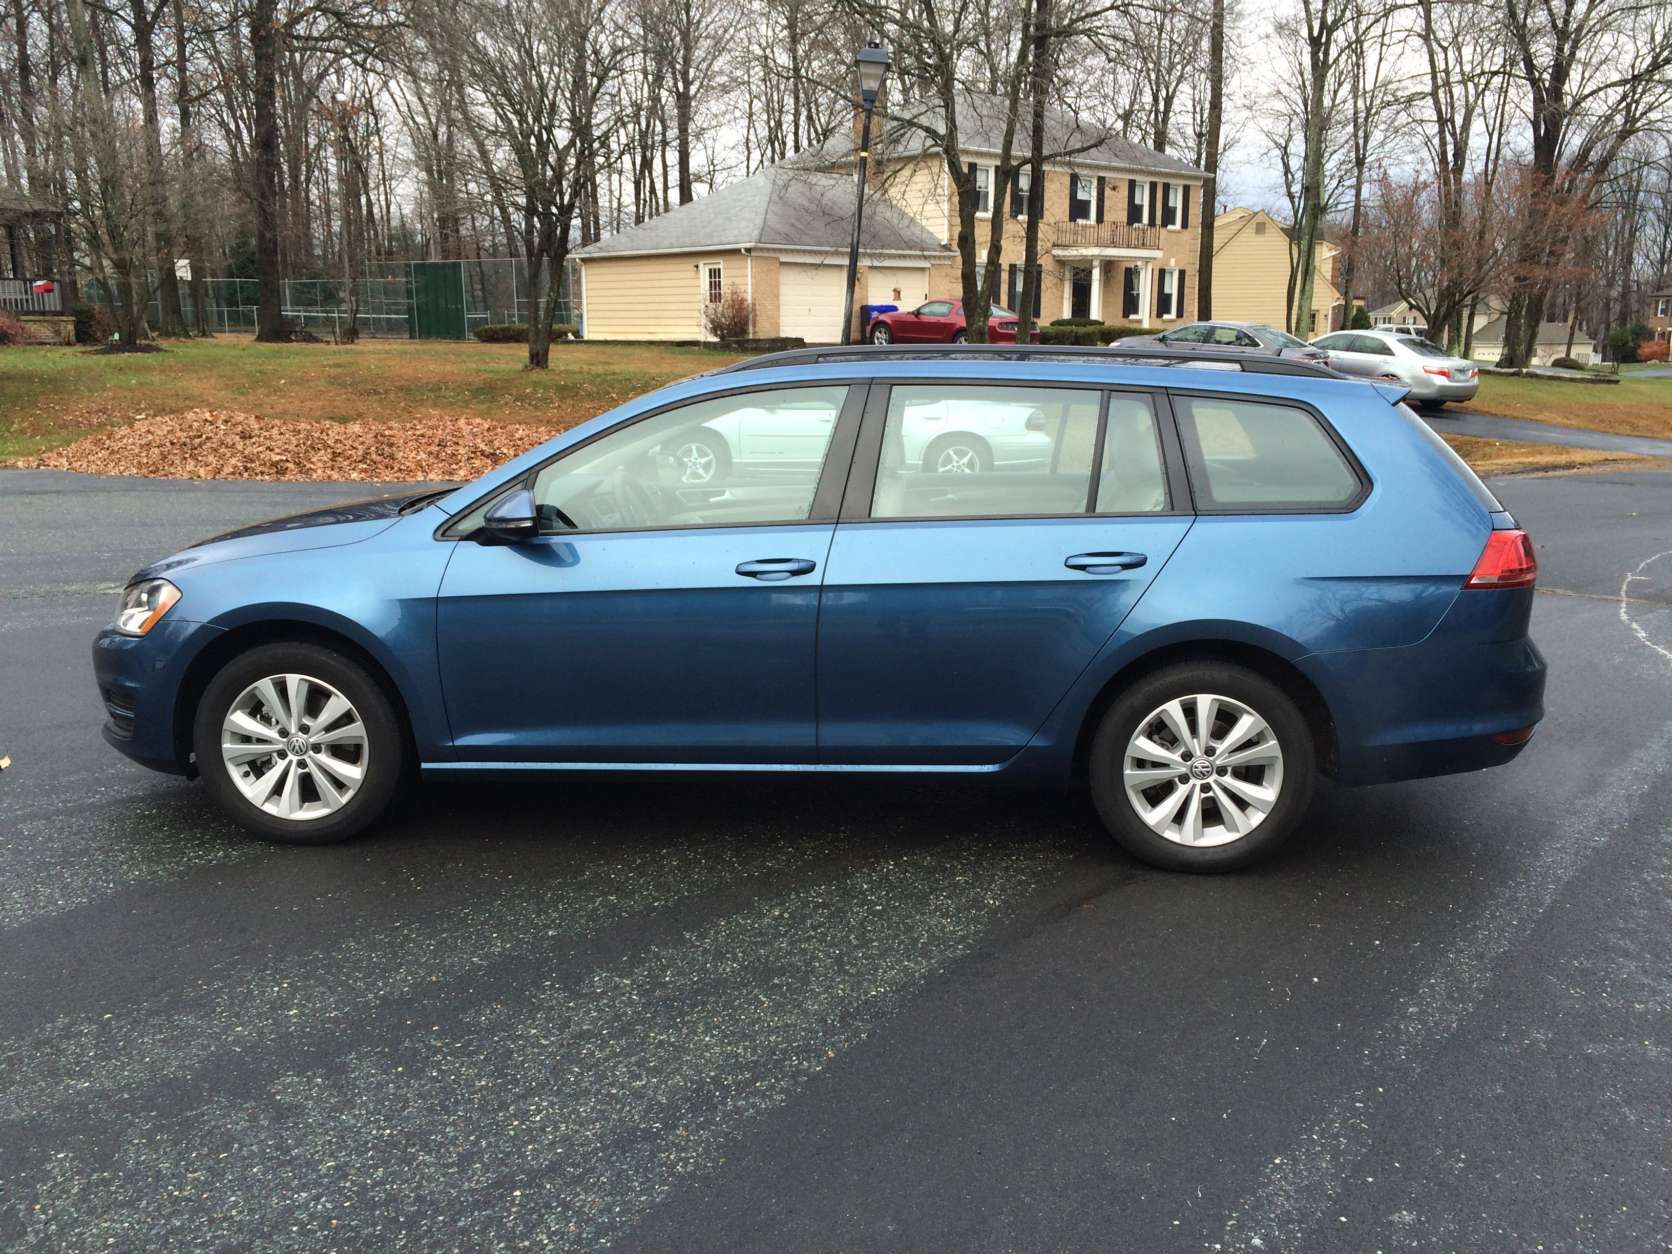 Some larger wheels might also help with curb appeal as the 16-inch wheels look a little small. (WTOP/Mike Parris)